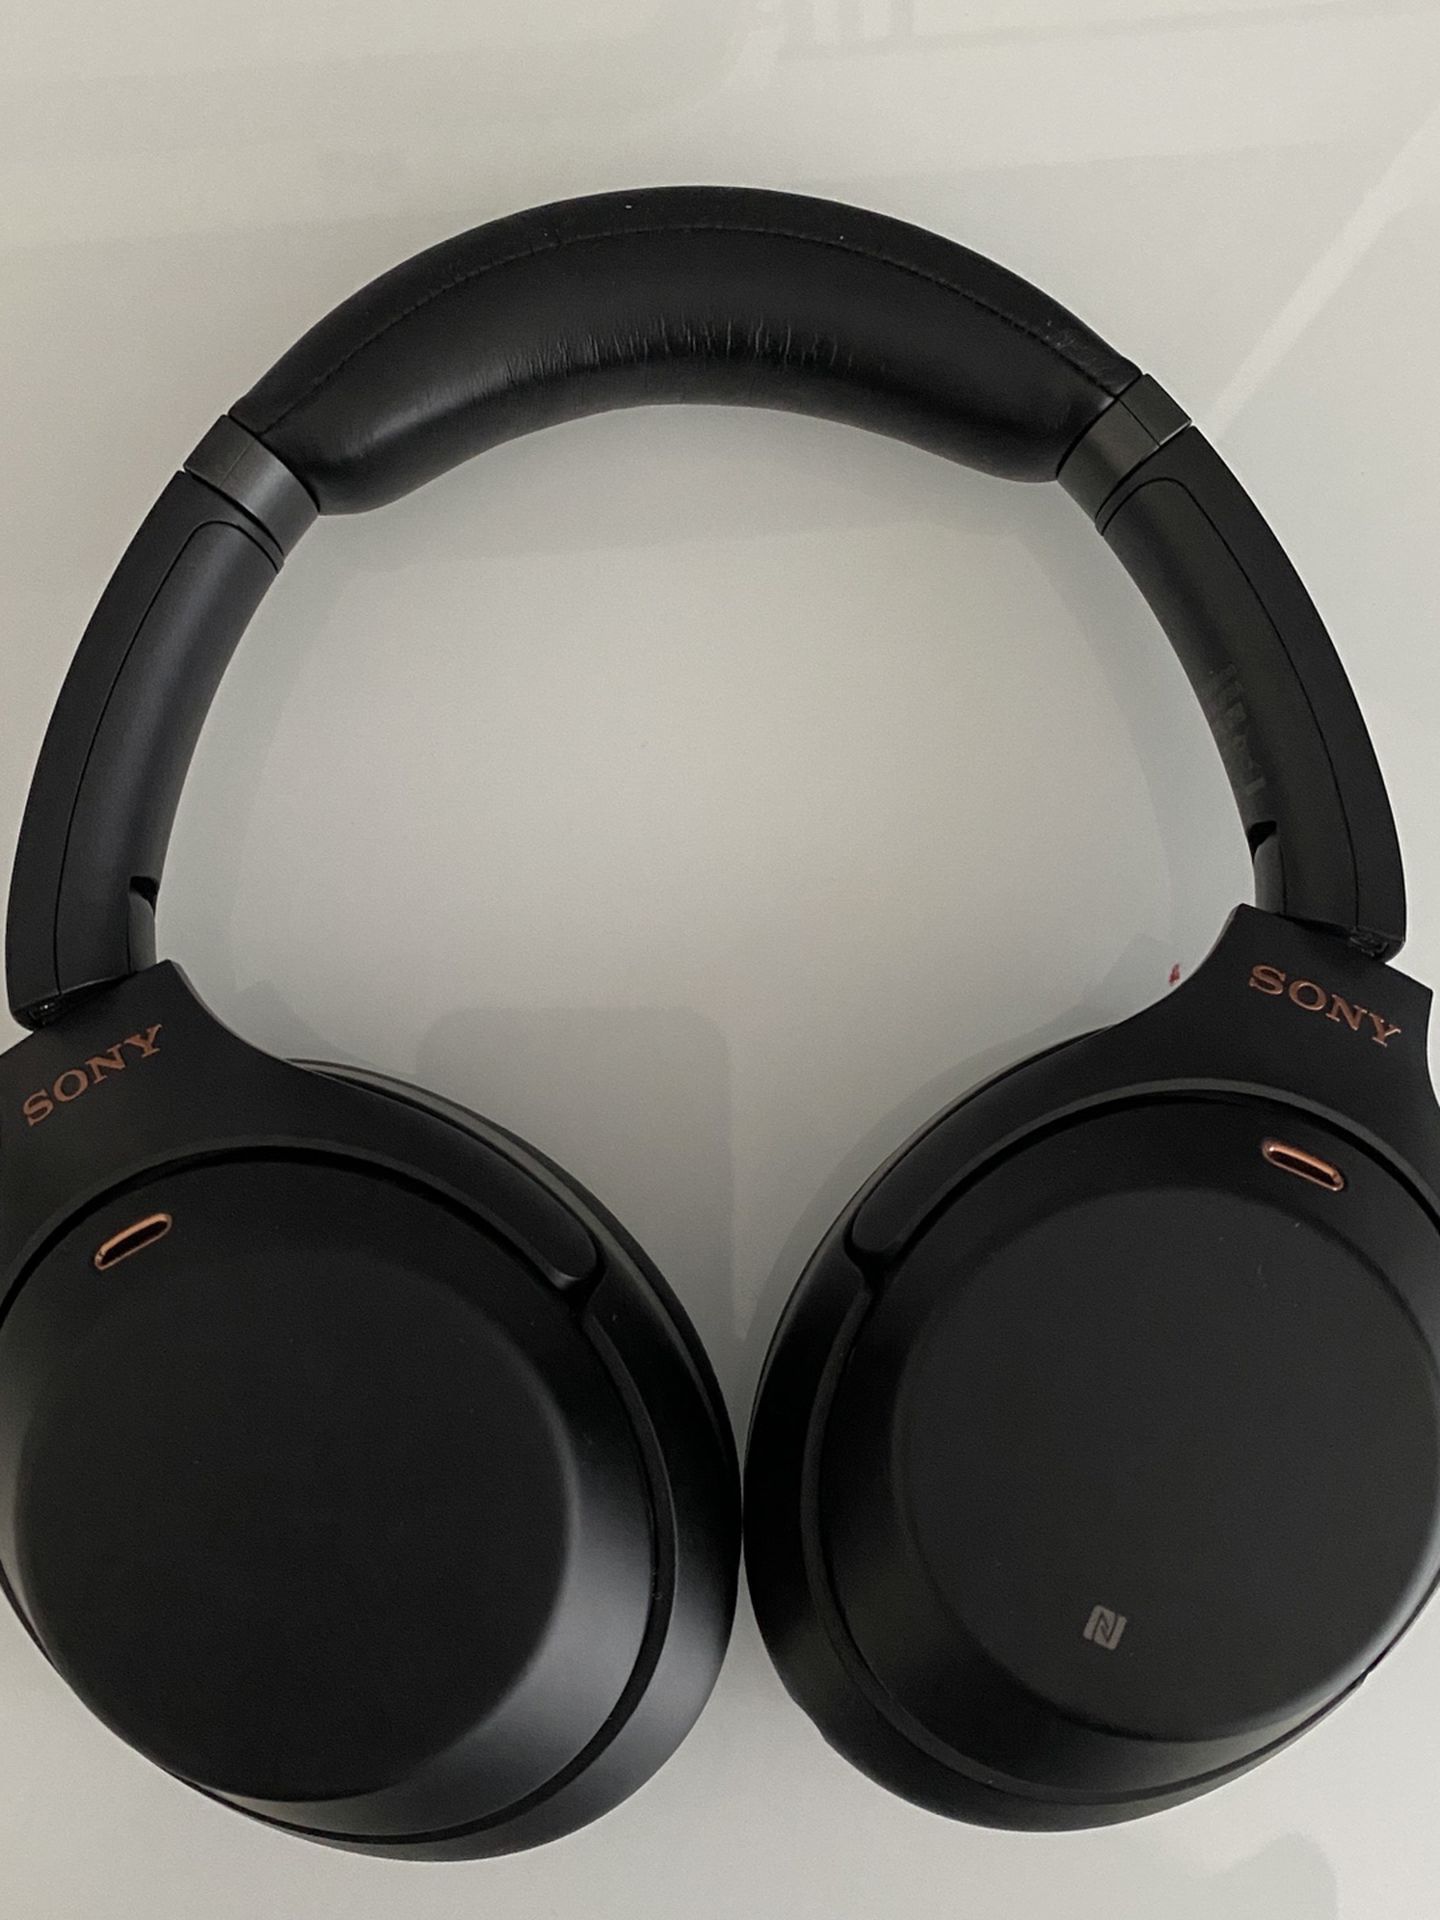 Sony WH1000XM3 Noise Cancelling Wireless Headphones